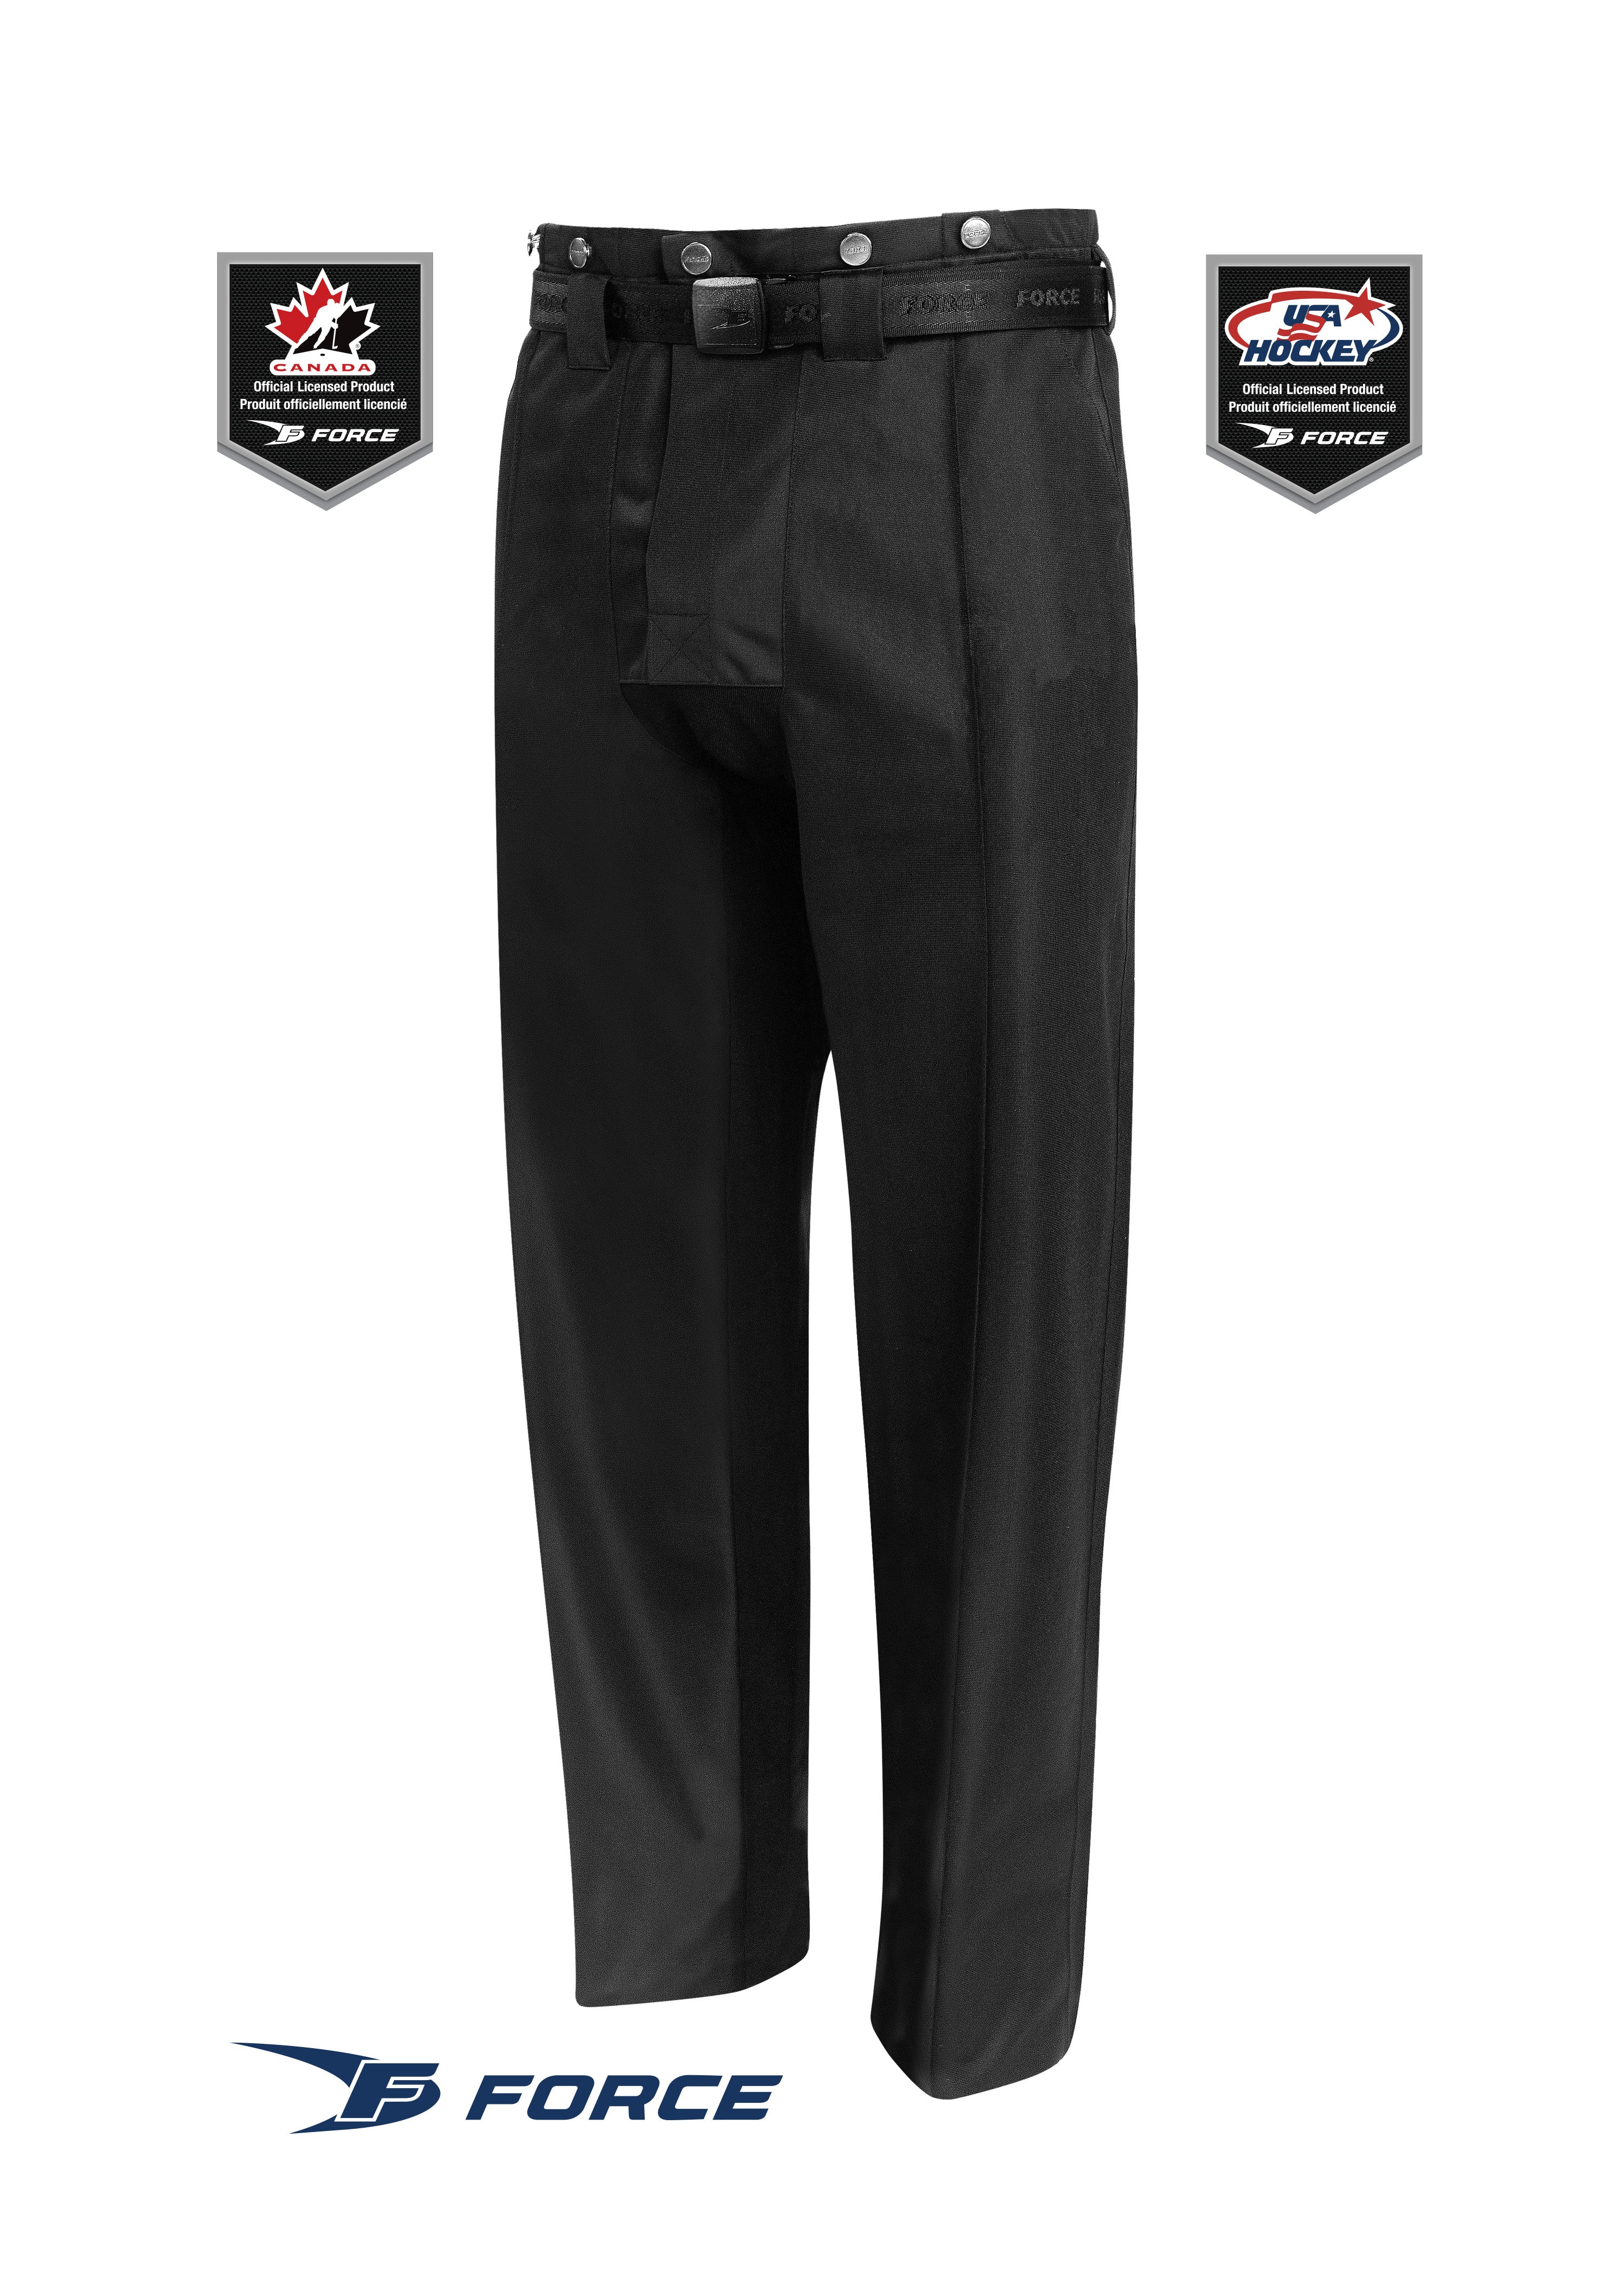 FORCE Pro A-21 Referee / Linesman Officiating Pant – Officials Equipment